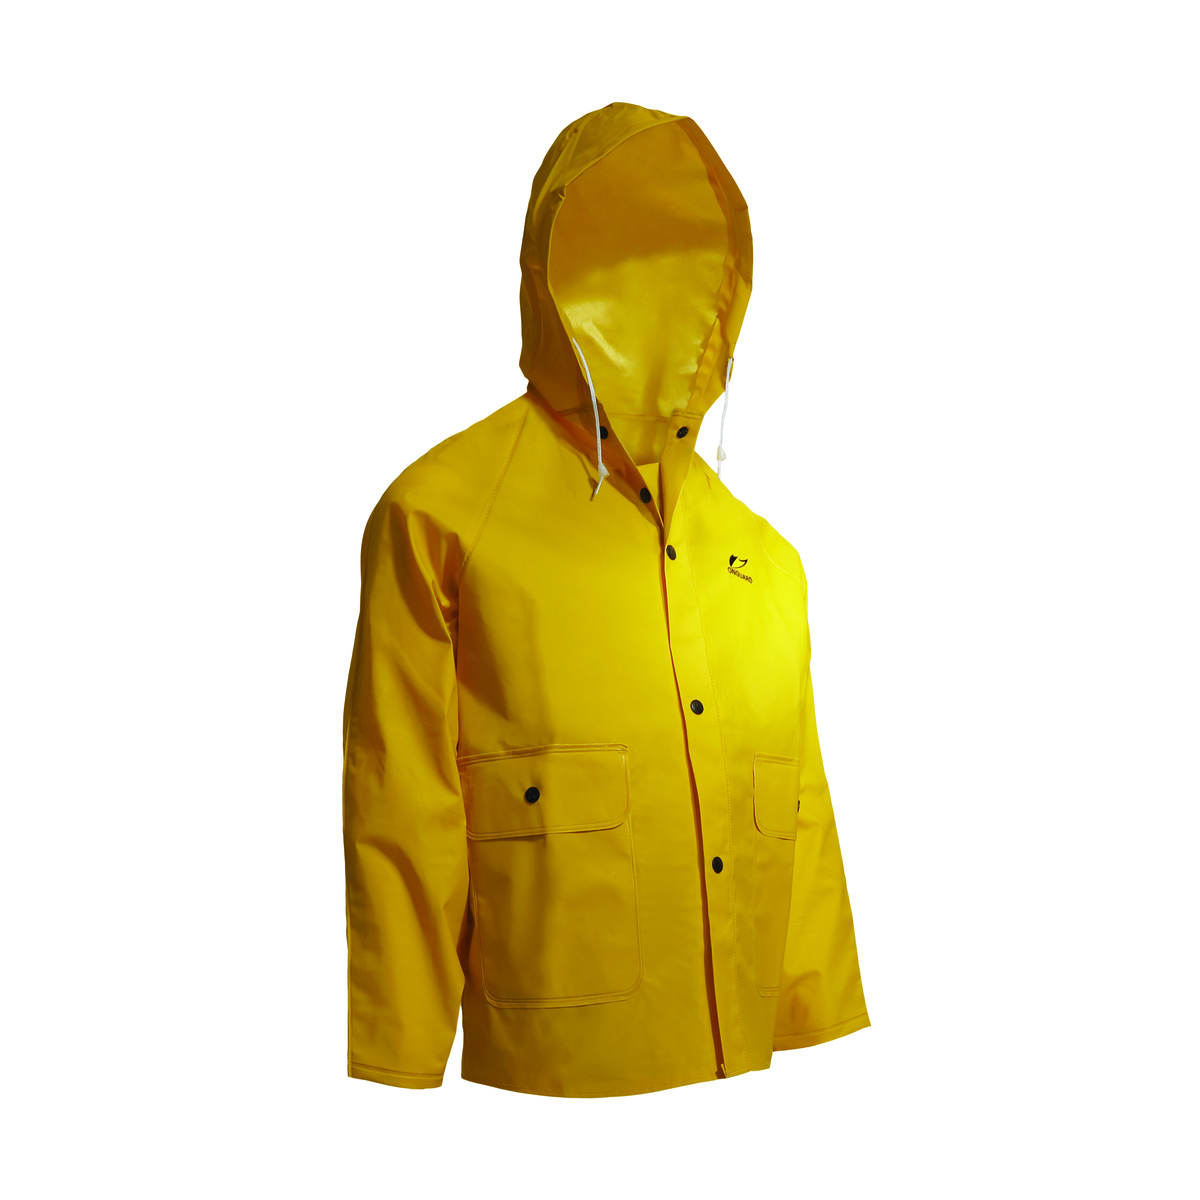 Dunlop® Protective Footwear 2X Yellow Sitex .35 mm Polyester/PVC Rain Jacket With Attached Hood